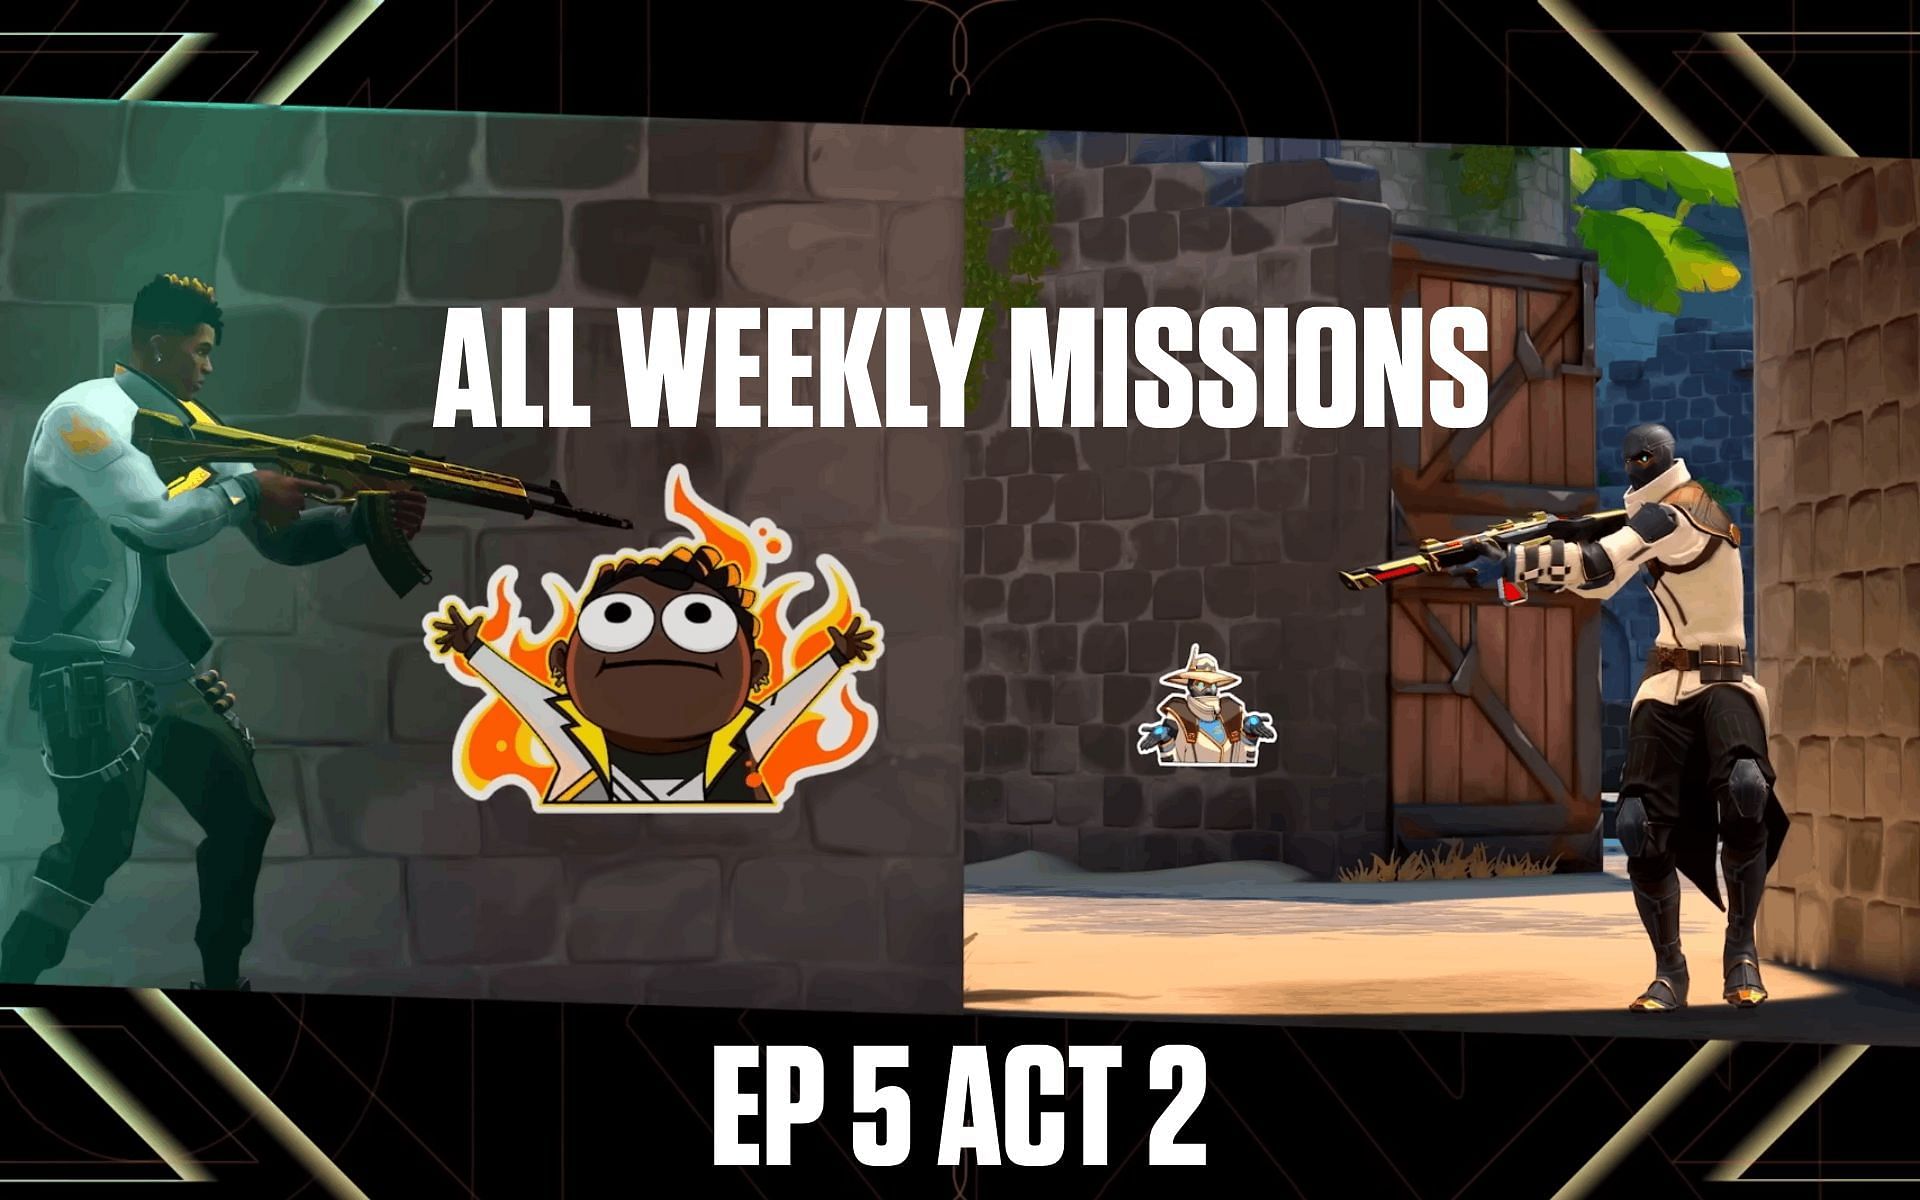 All weekly missions in Episode 5 Act 2 (Image via Sportskeeda)